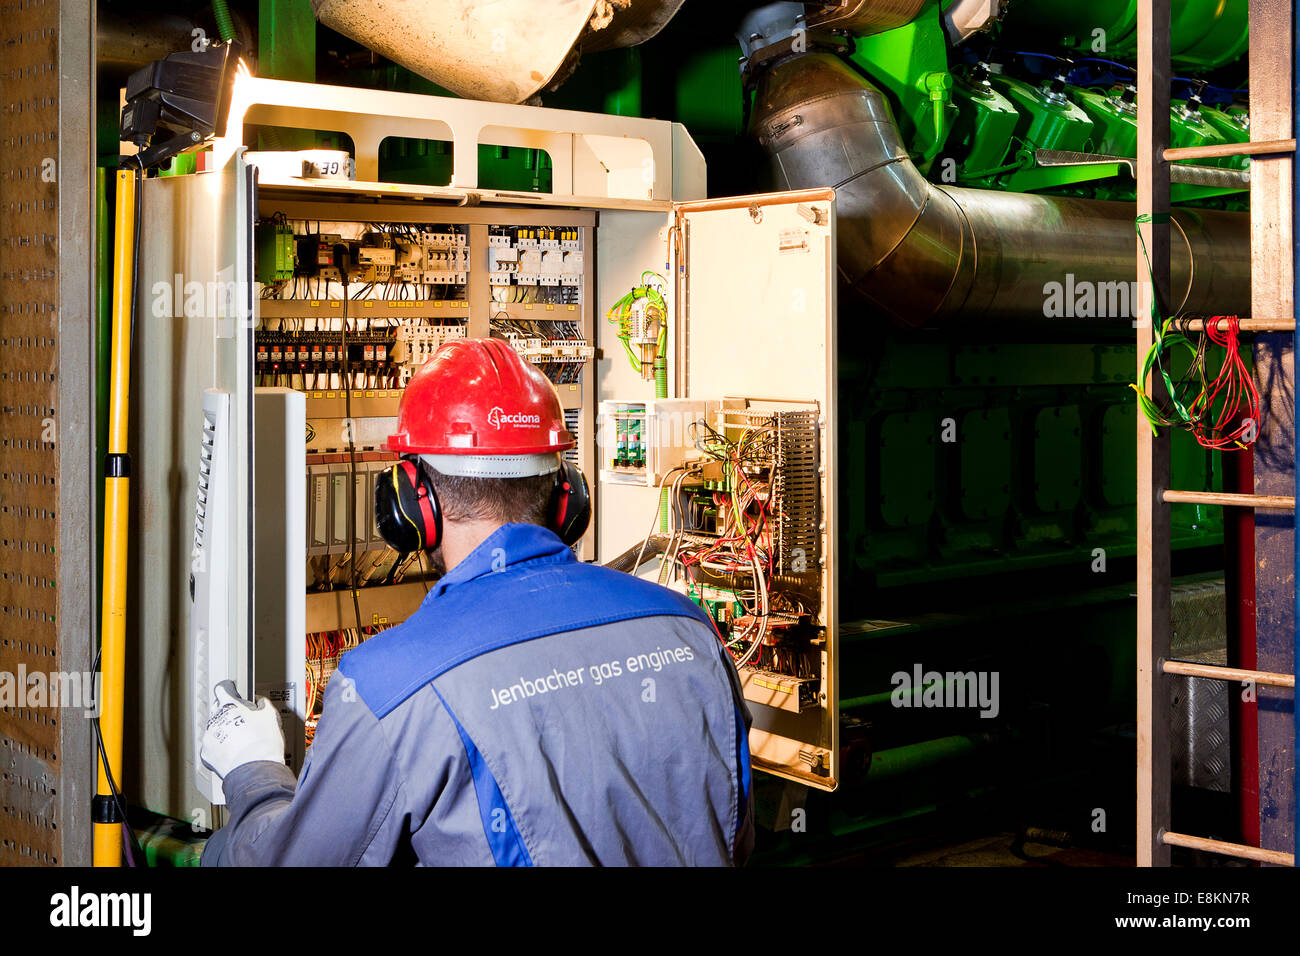 Technician looking for faults, switch box of a gas engine, Landfrischmolkerei dairy, Wels, Upper Austria, Austria Stock Photo